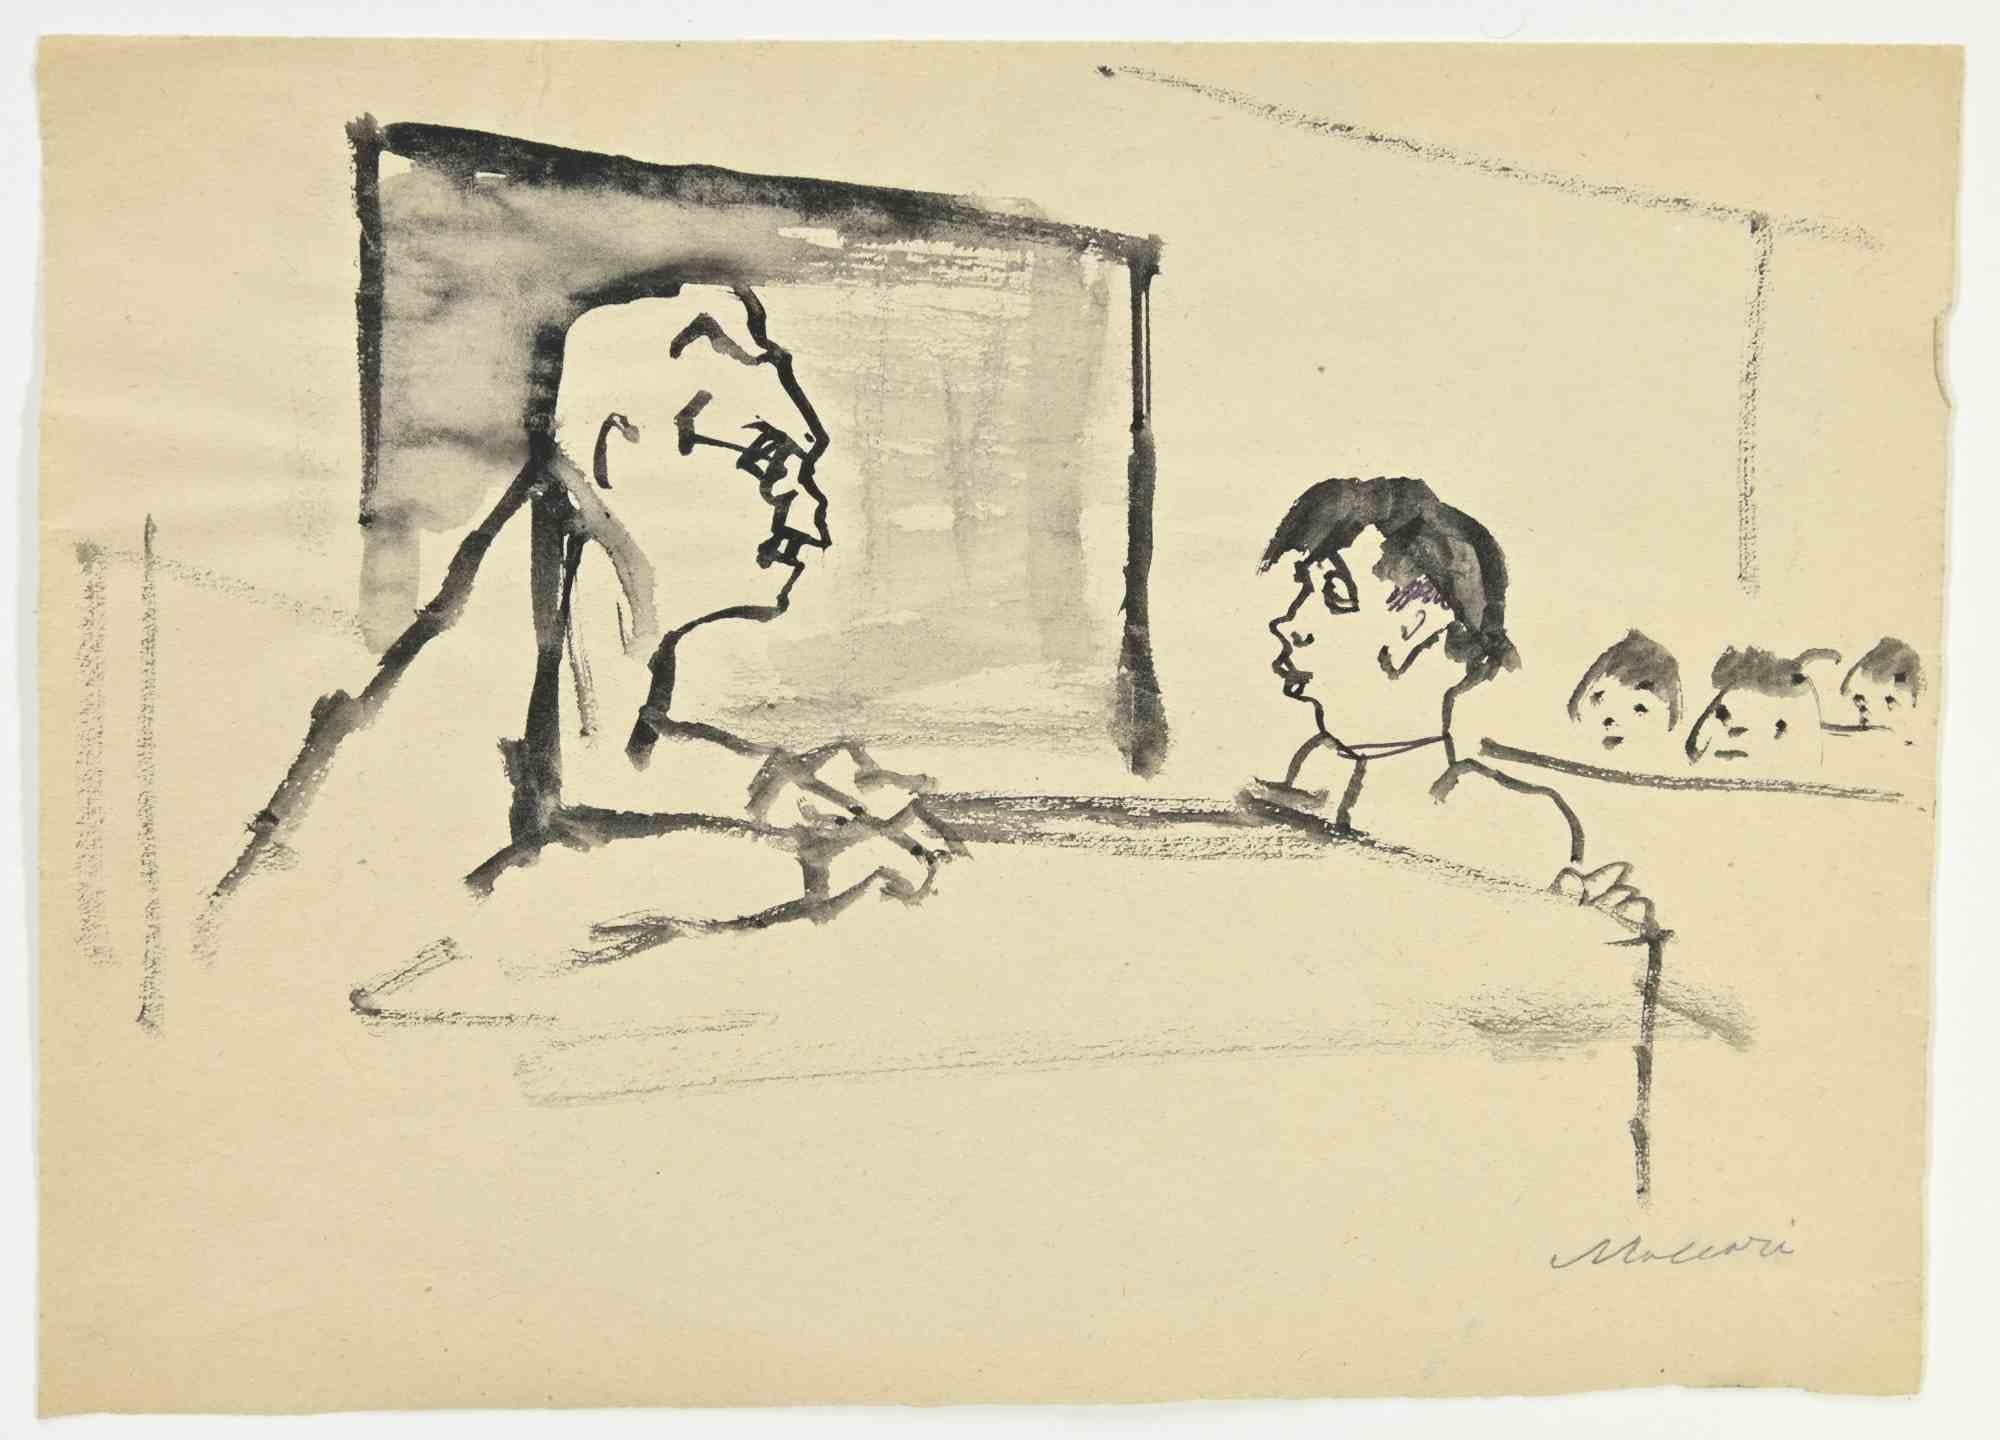 At School is a Watercolor Drawing realized by Mino Maccari  (1924-1989) in the 1960s.

Hand-signed on the lower.

Good condition.

Mino Maccari (Siena, 1924-Rome, June 16, 1989) was an Italian writer, painter, engraver and journalist, winner of the